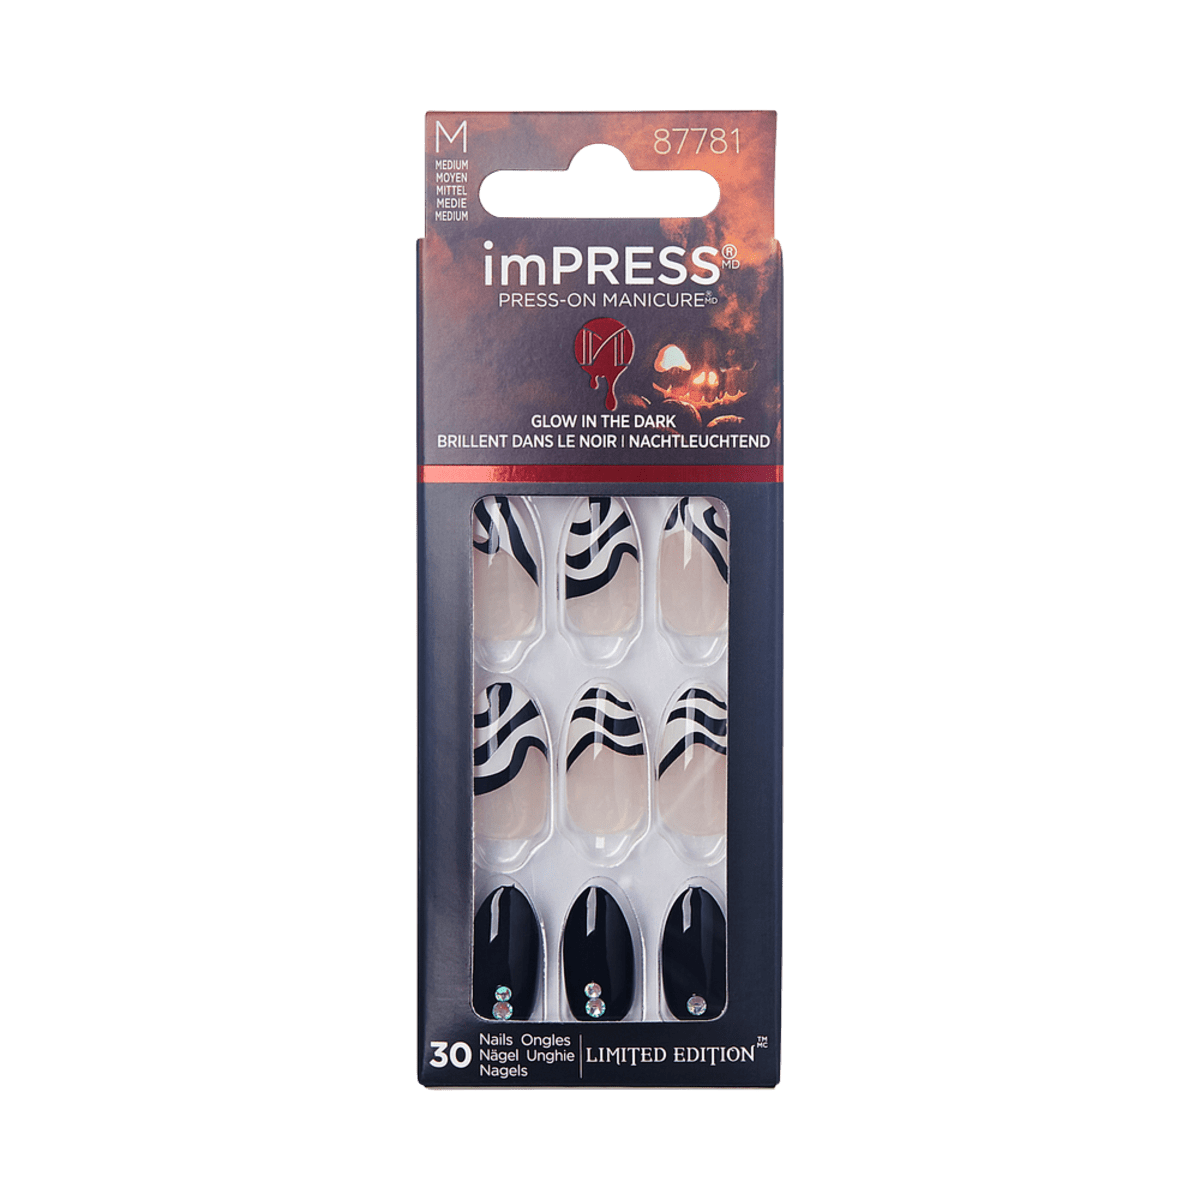 imPRESS Press-On Manicure Halloween Glow in the Dark- Feeling witchy